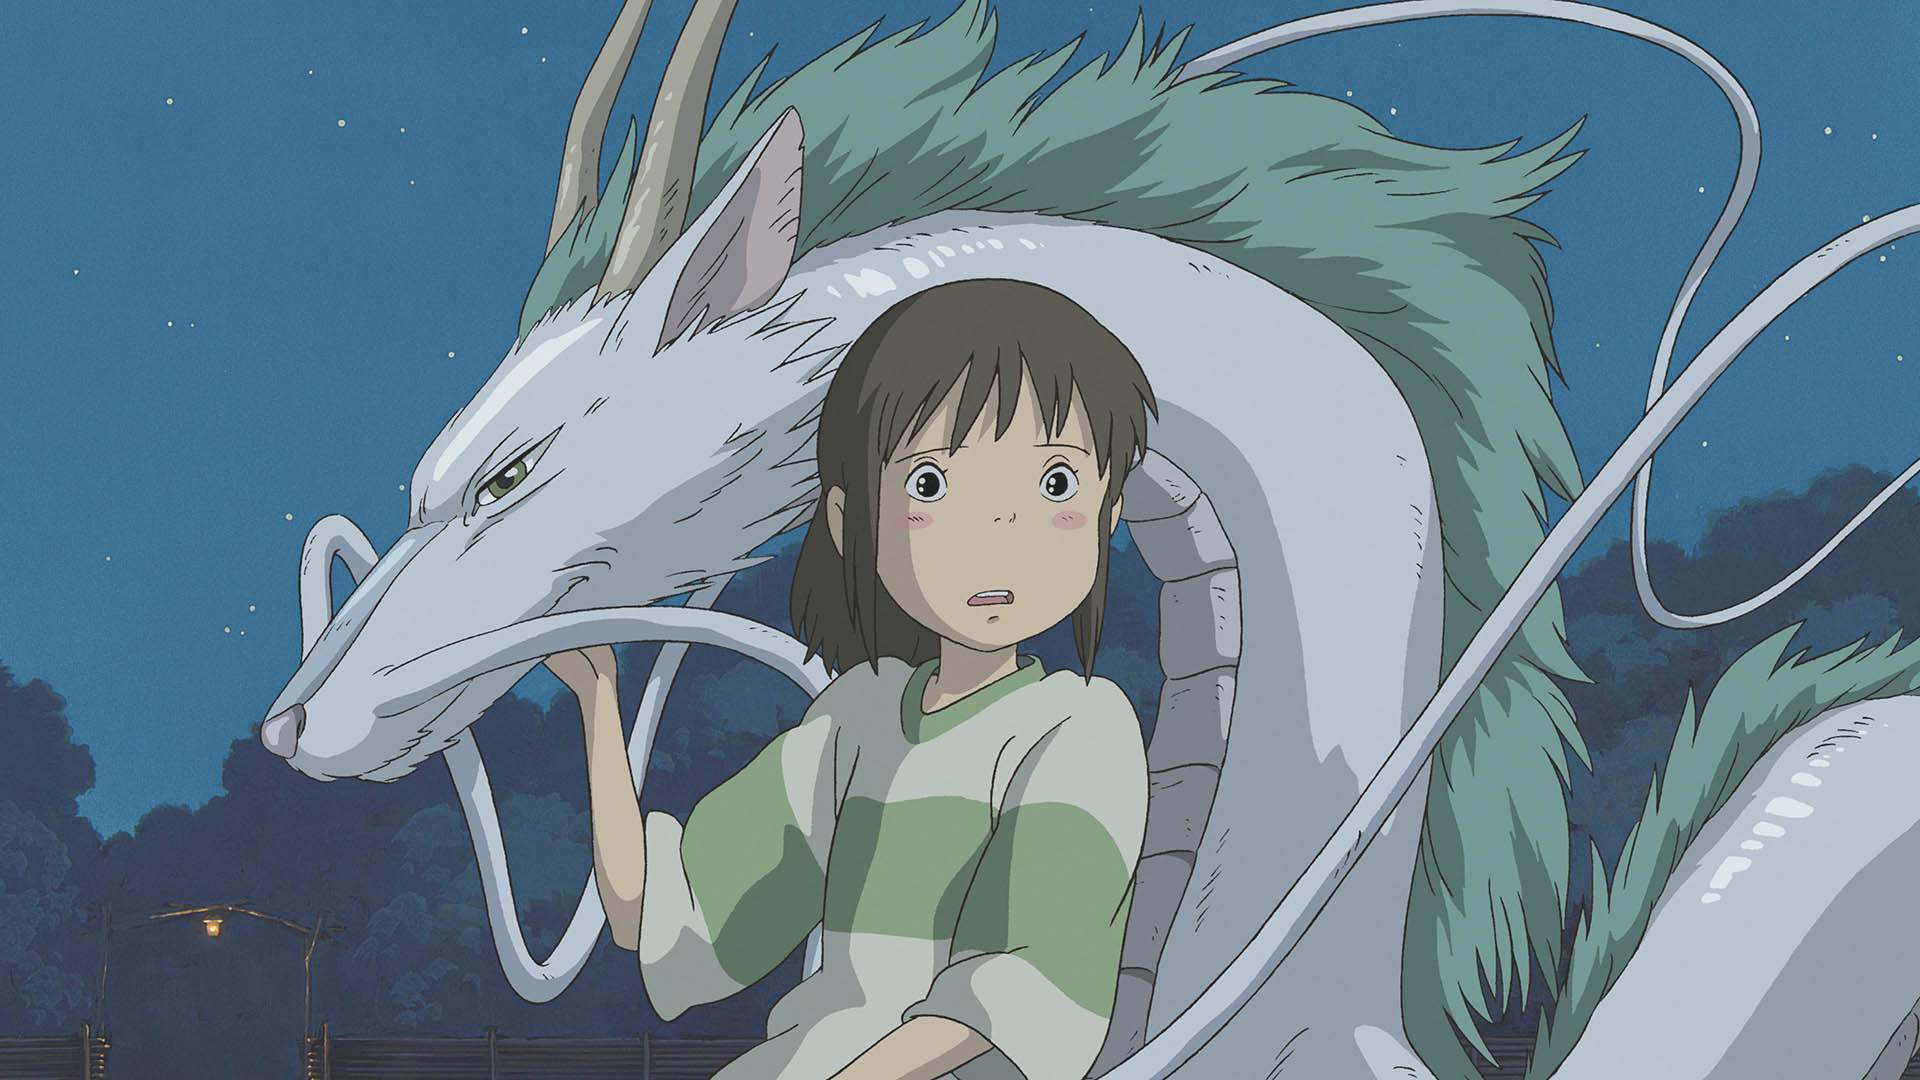 A List of All the Studio Ghibli Movies, Ranked - Concrete Playground